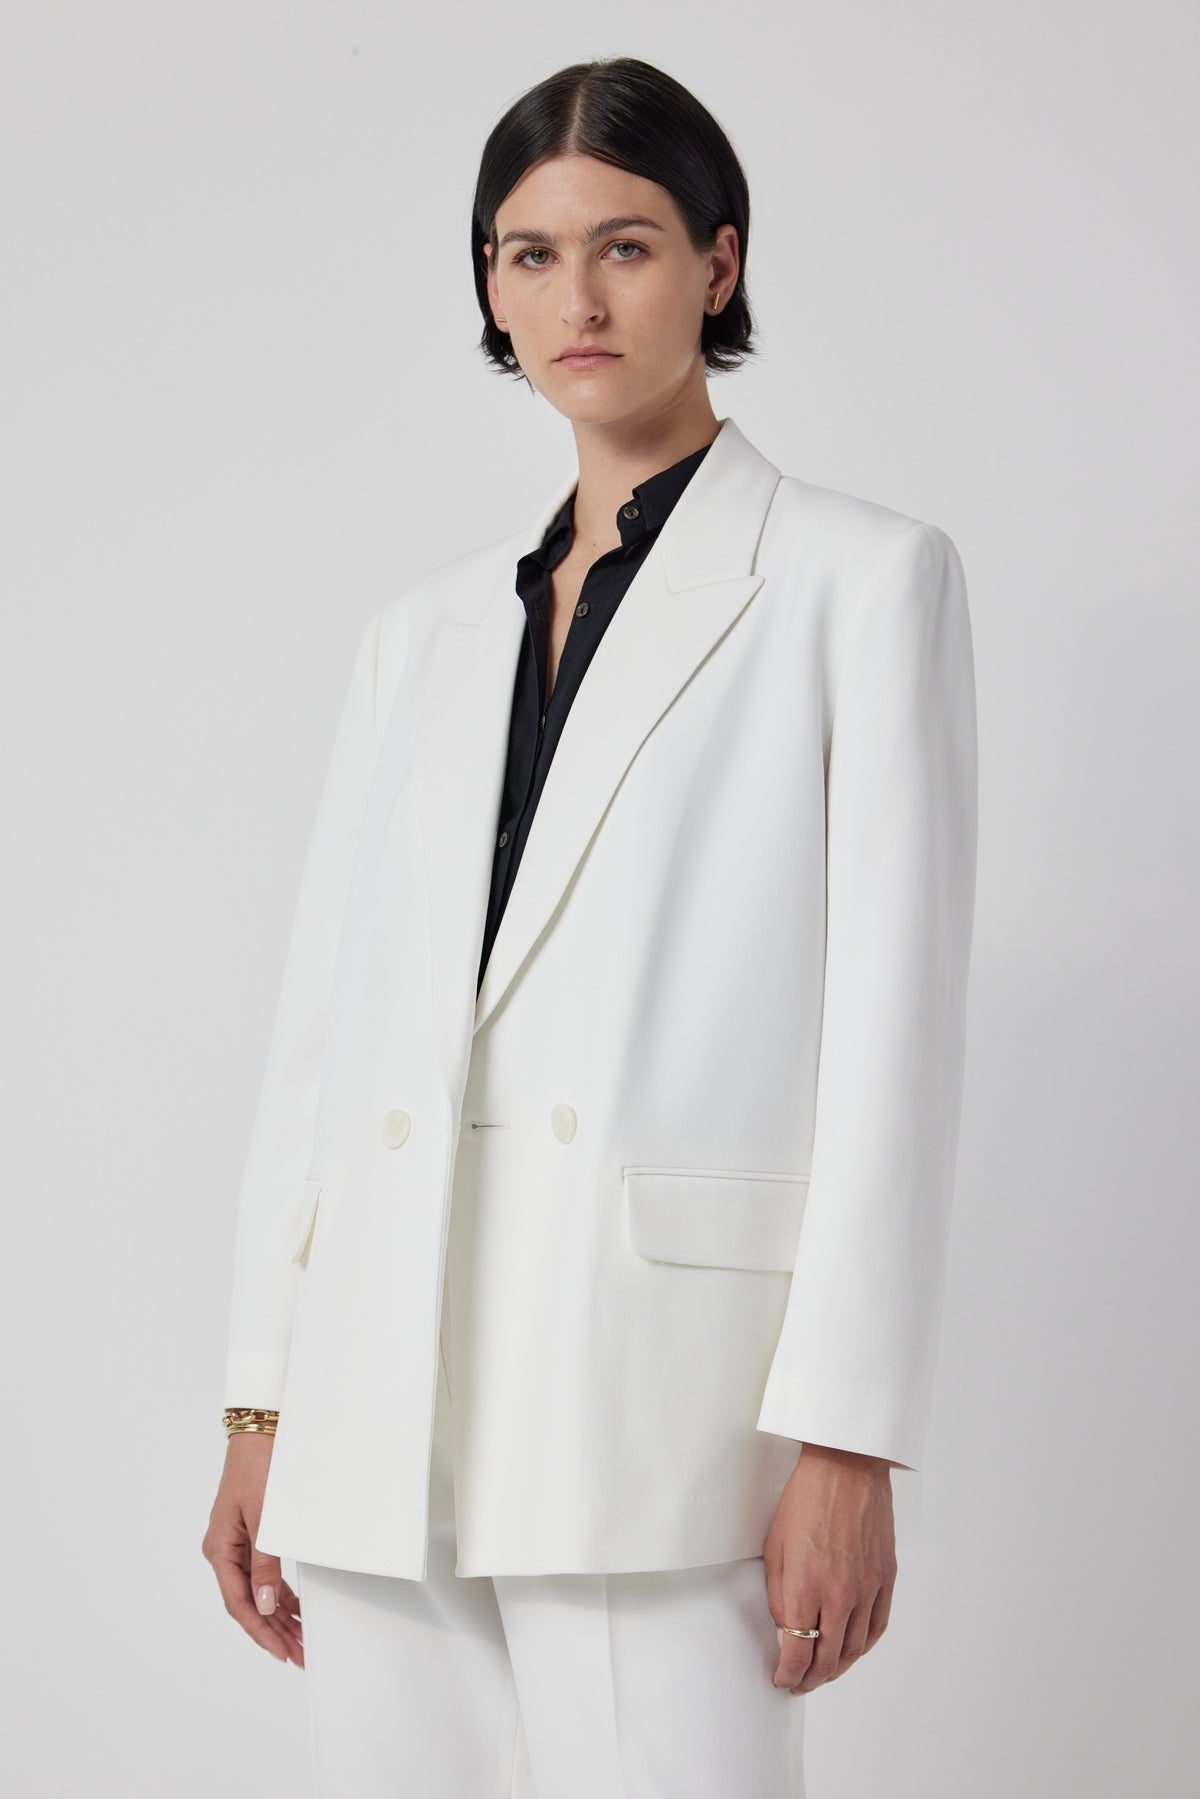 A woman wearing a white Fairfax blazer by Velvet by Jenny Graham.-36168664318145